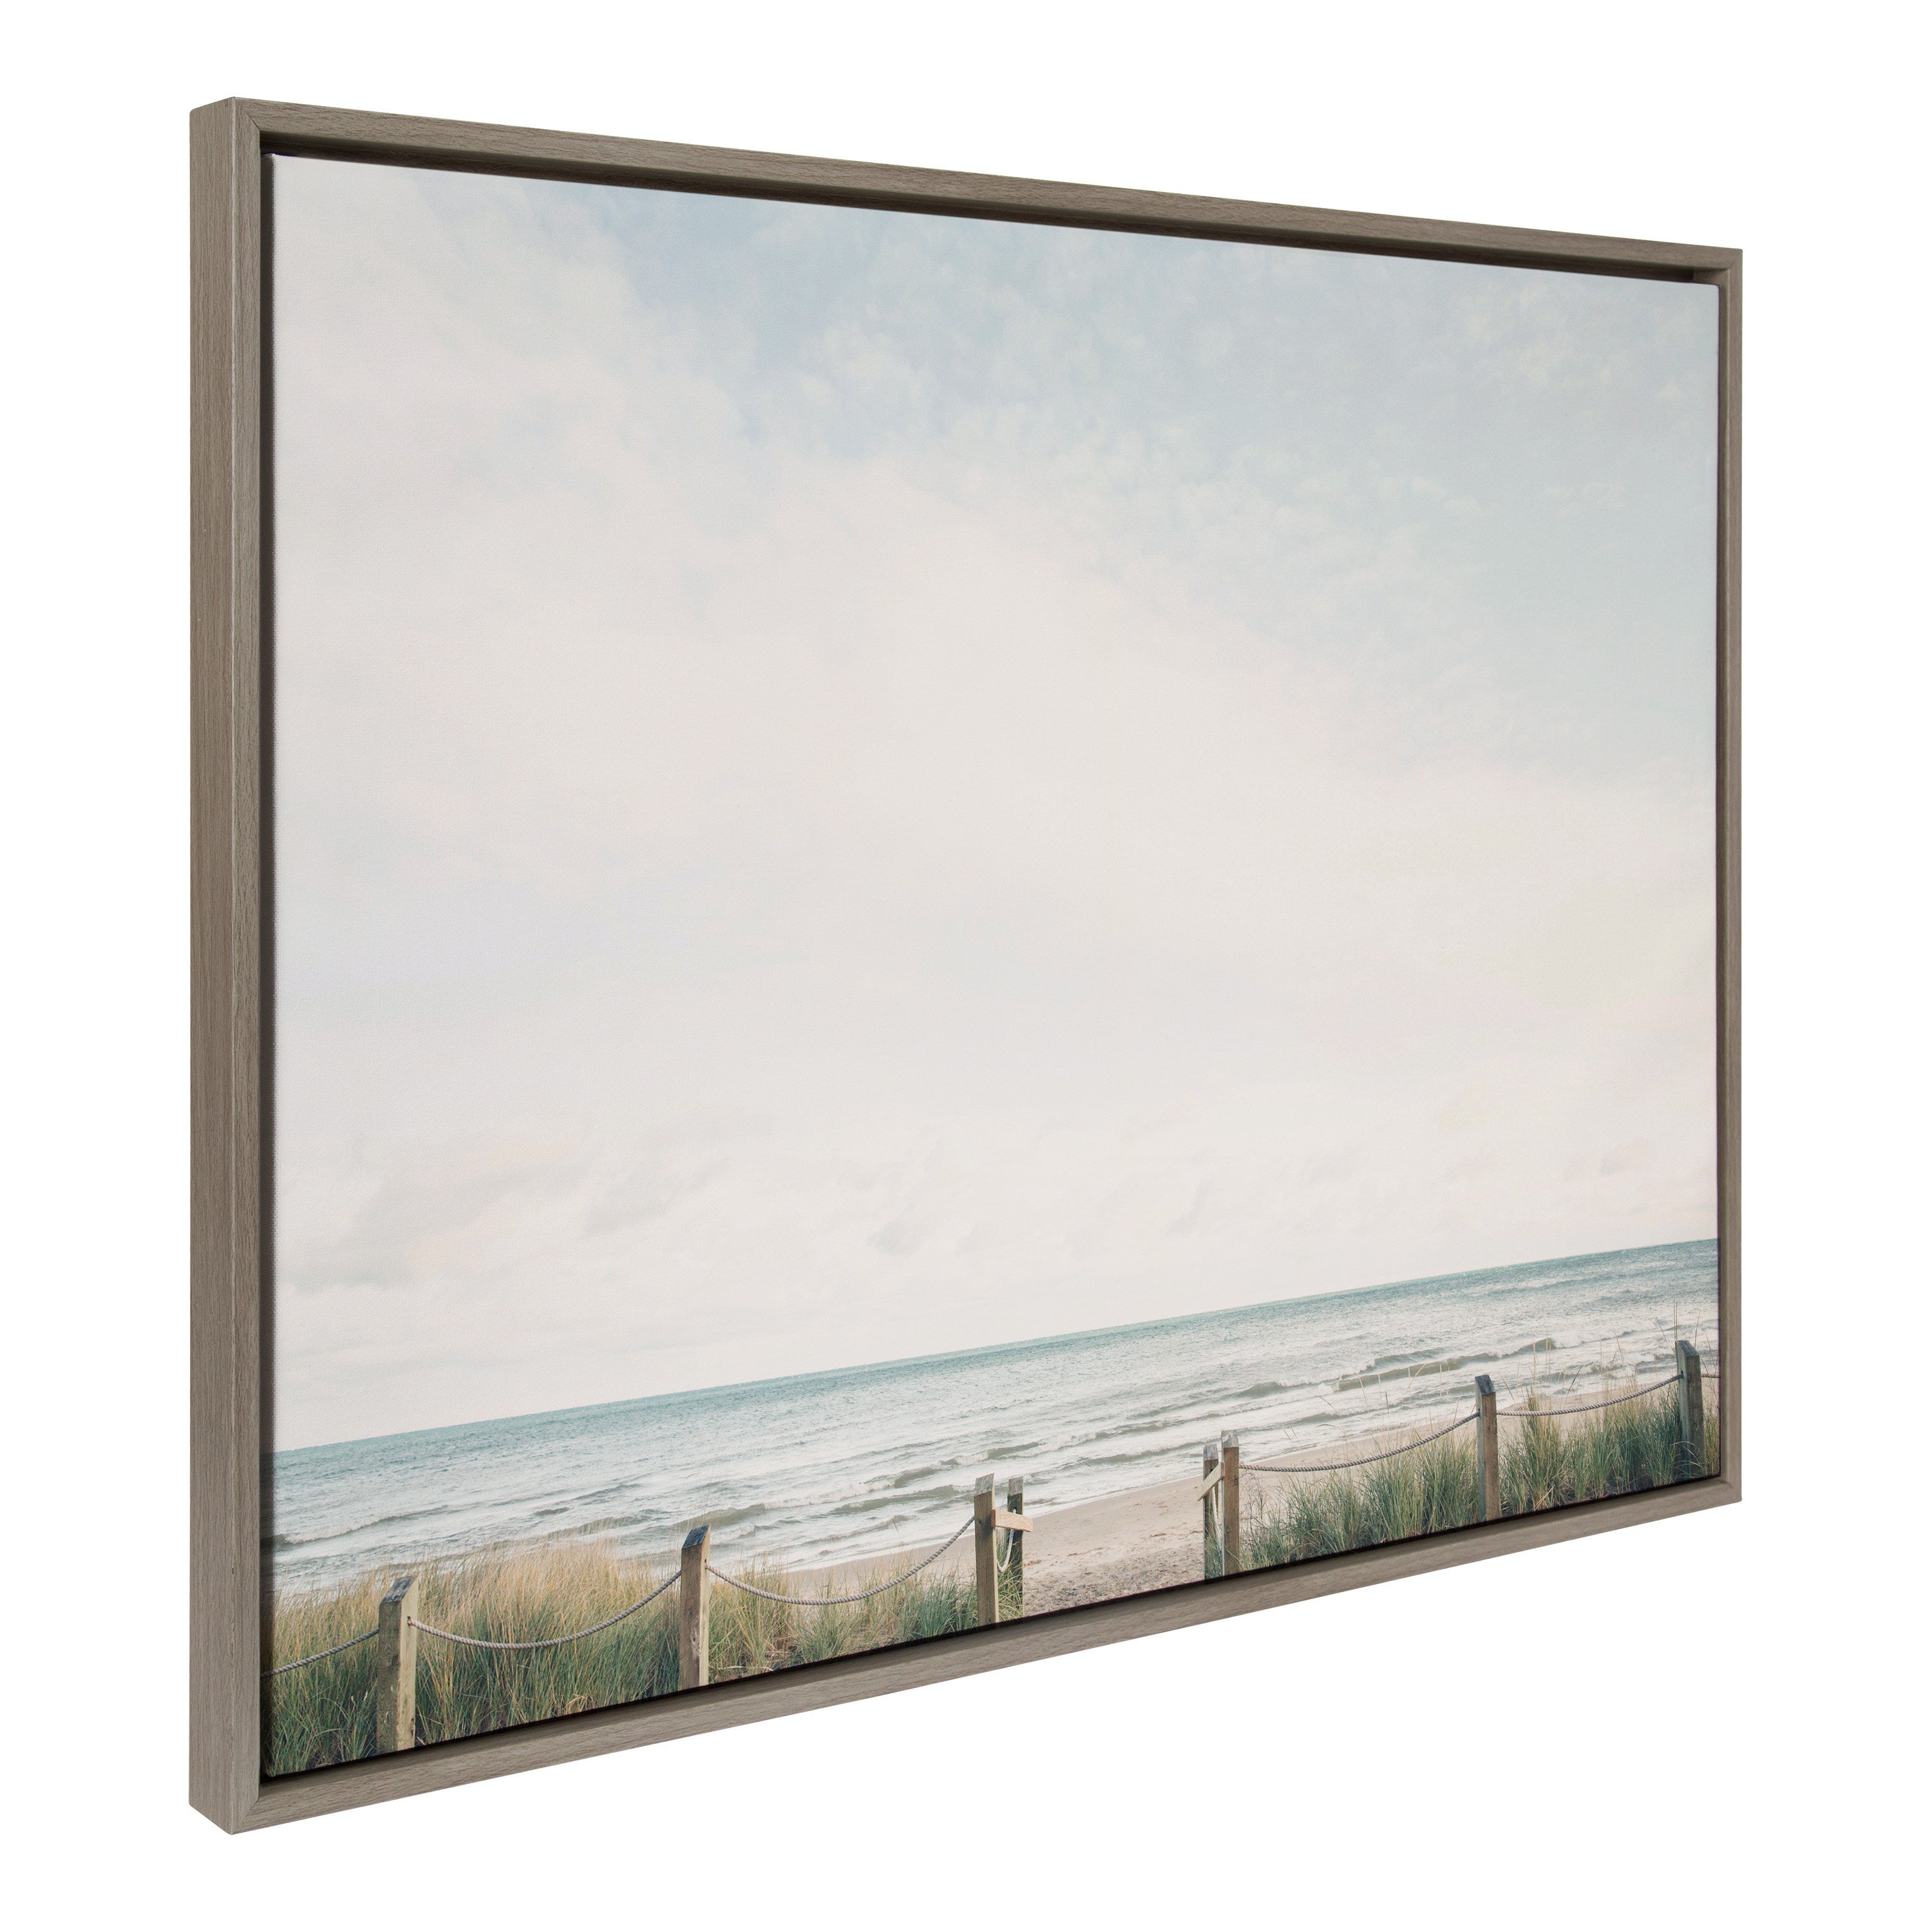 Sylvie Pale Sky Framed Canvas by Emiko and Mark Franzen of F2Images